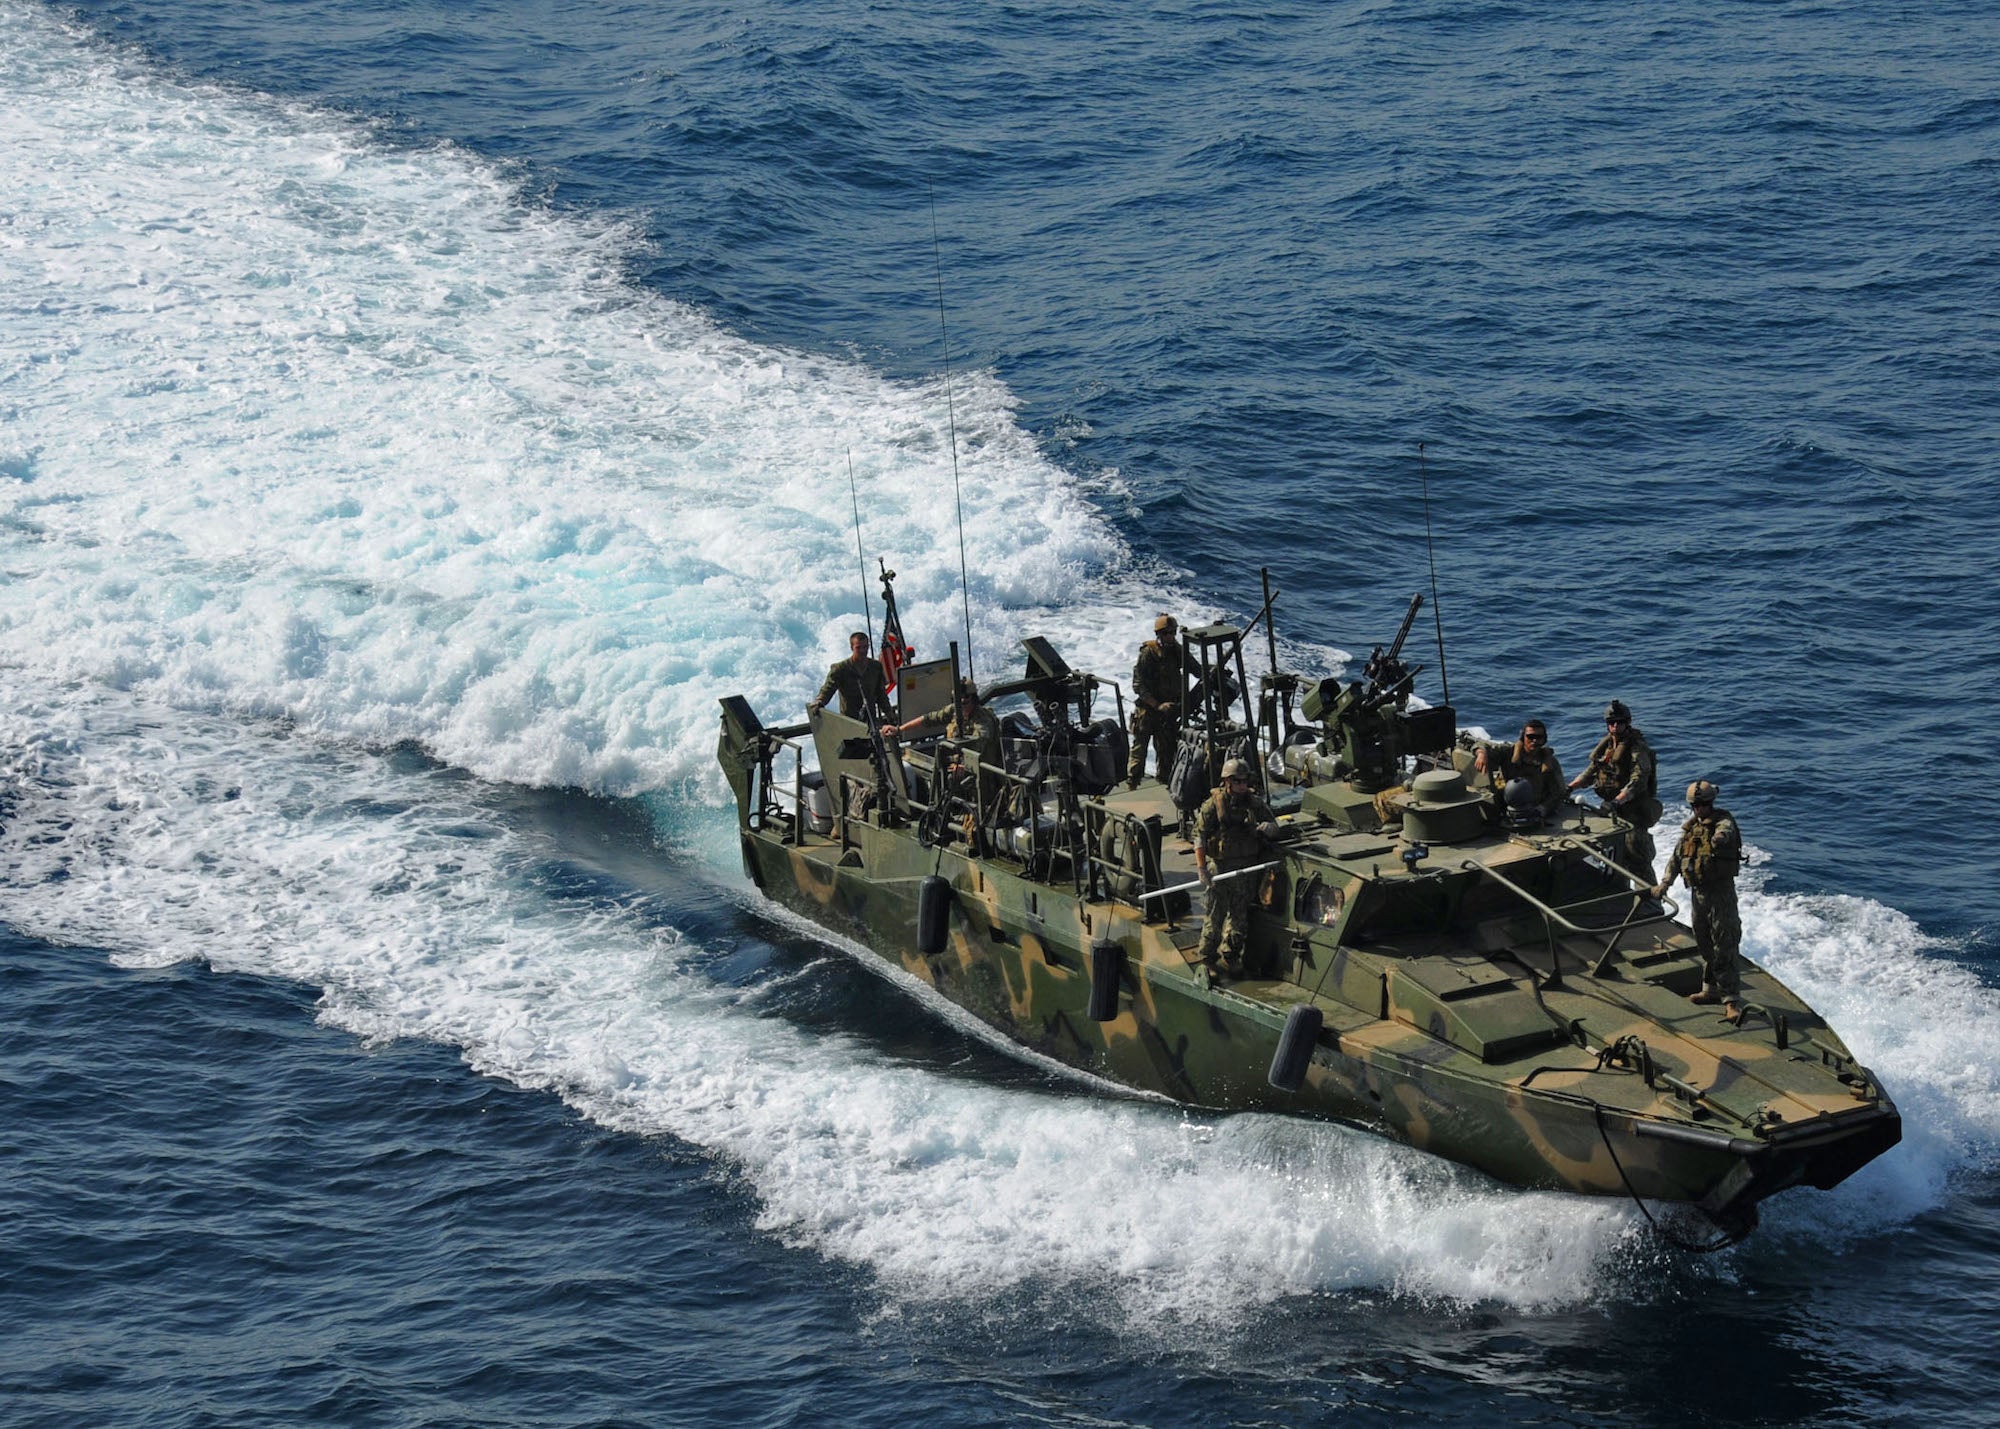 A riverine command boat from Riverine Detachment 23 is shown.